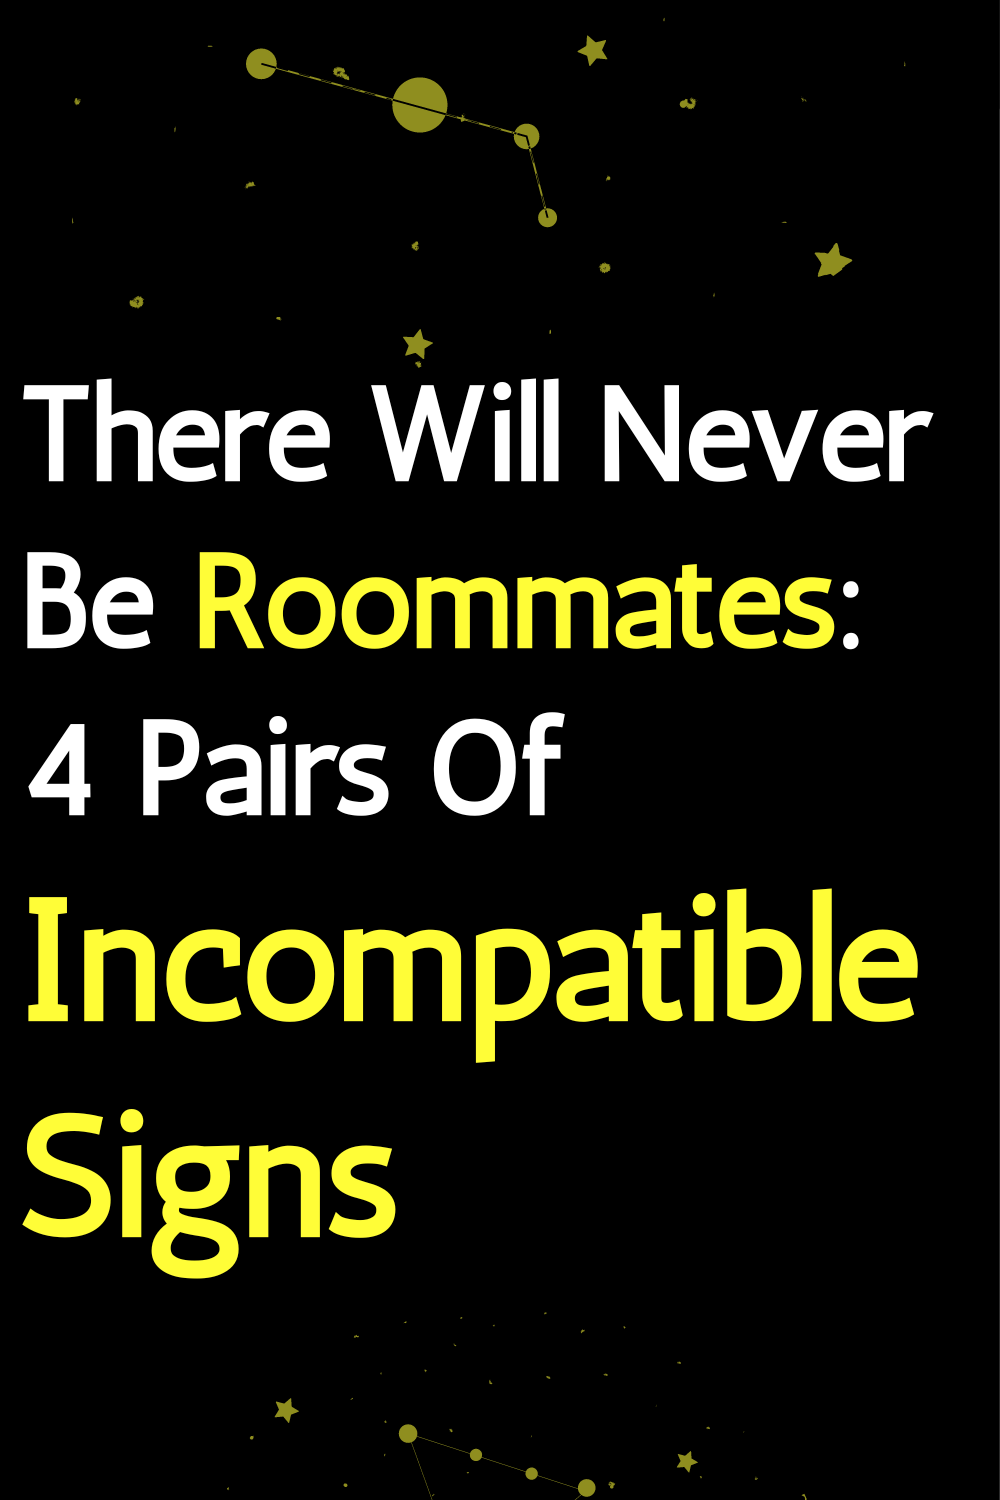 There Will Never Be Roommates: 4 Pairs Of Incompatible Signs